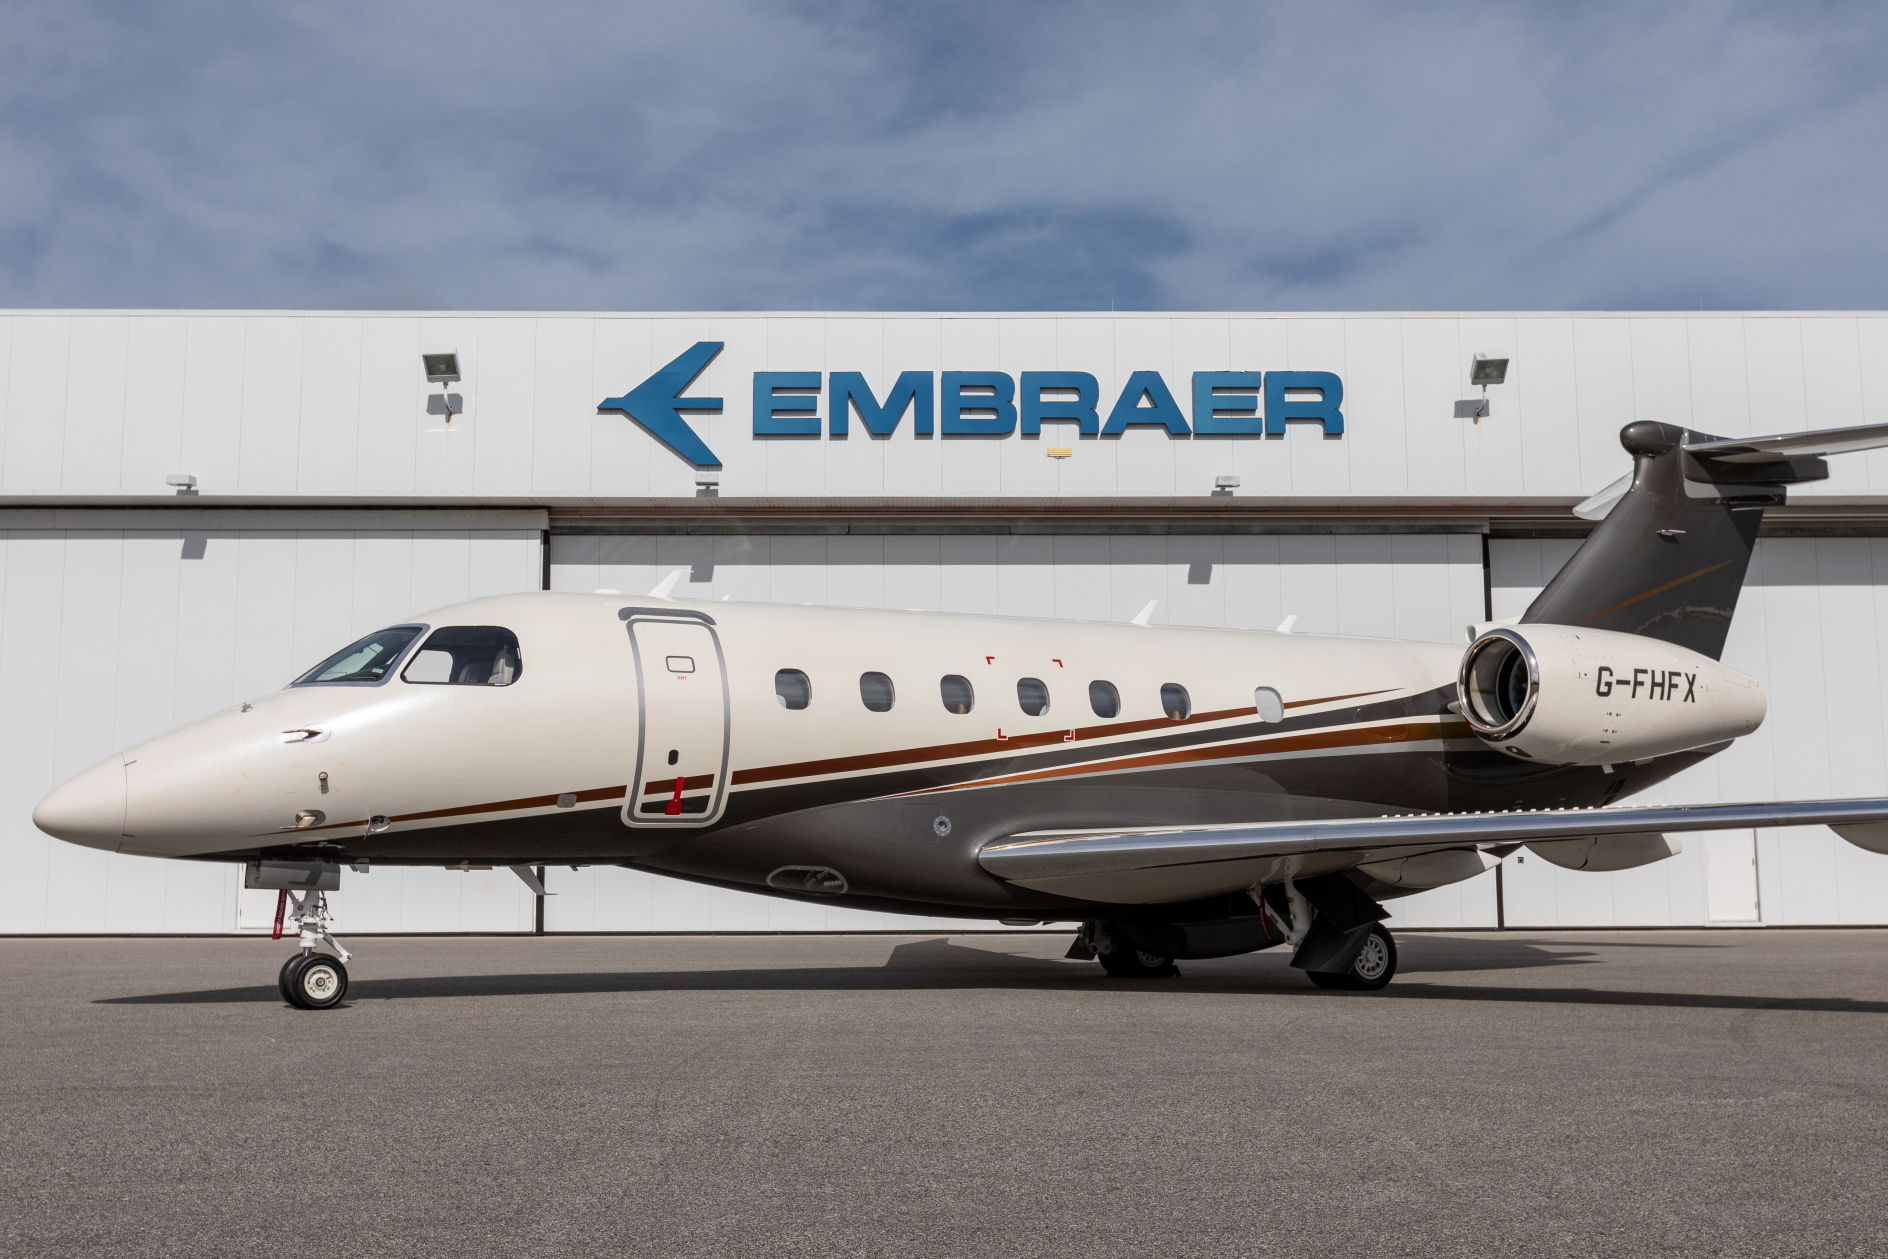 Flexjet has taken delivery of the first Praetor 600 business jet from Embraer. The aircraft will be used for Flexjet’s rapidly growing operations in Europe. Click to enlarge.